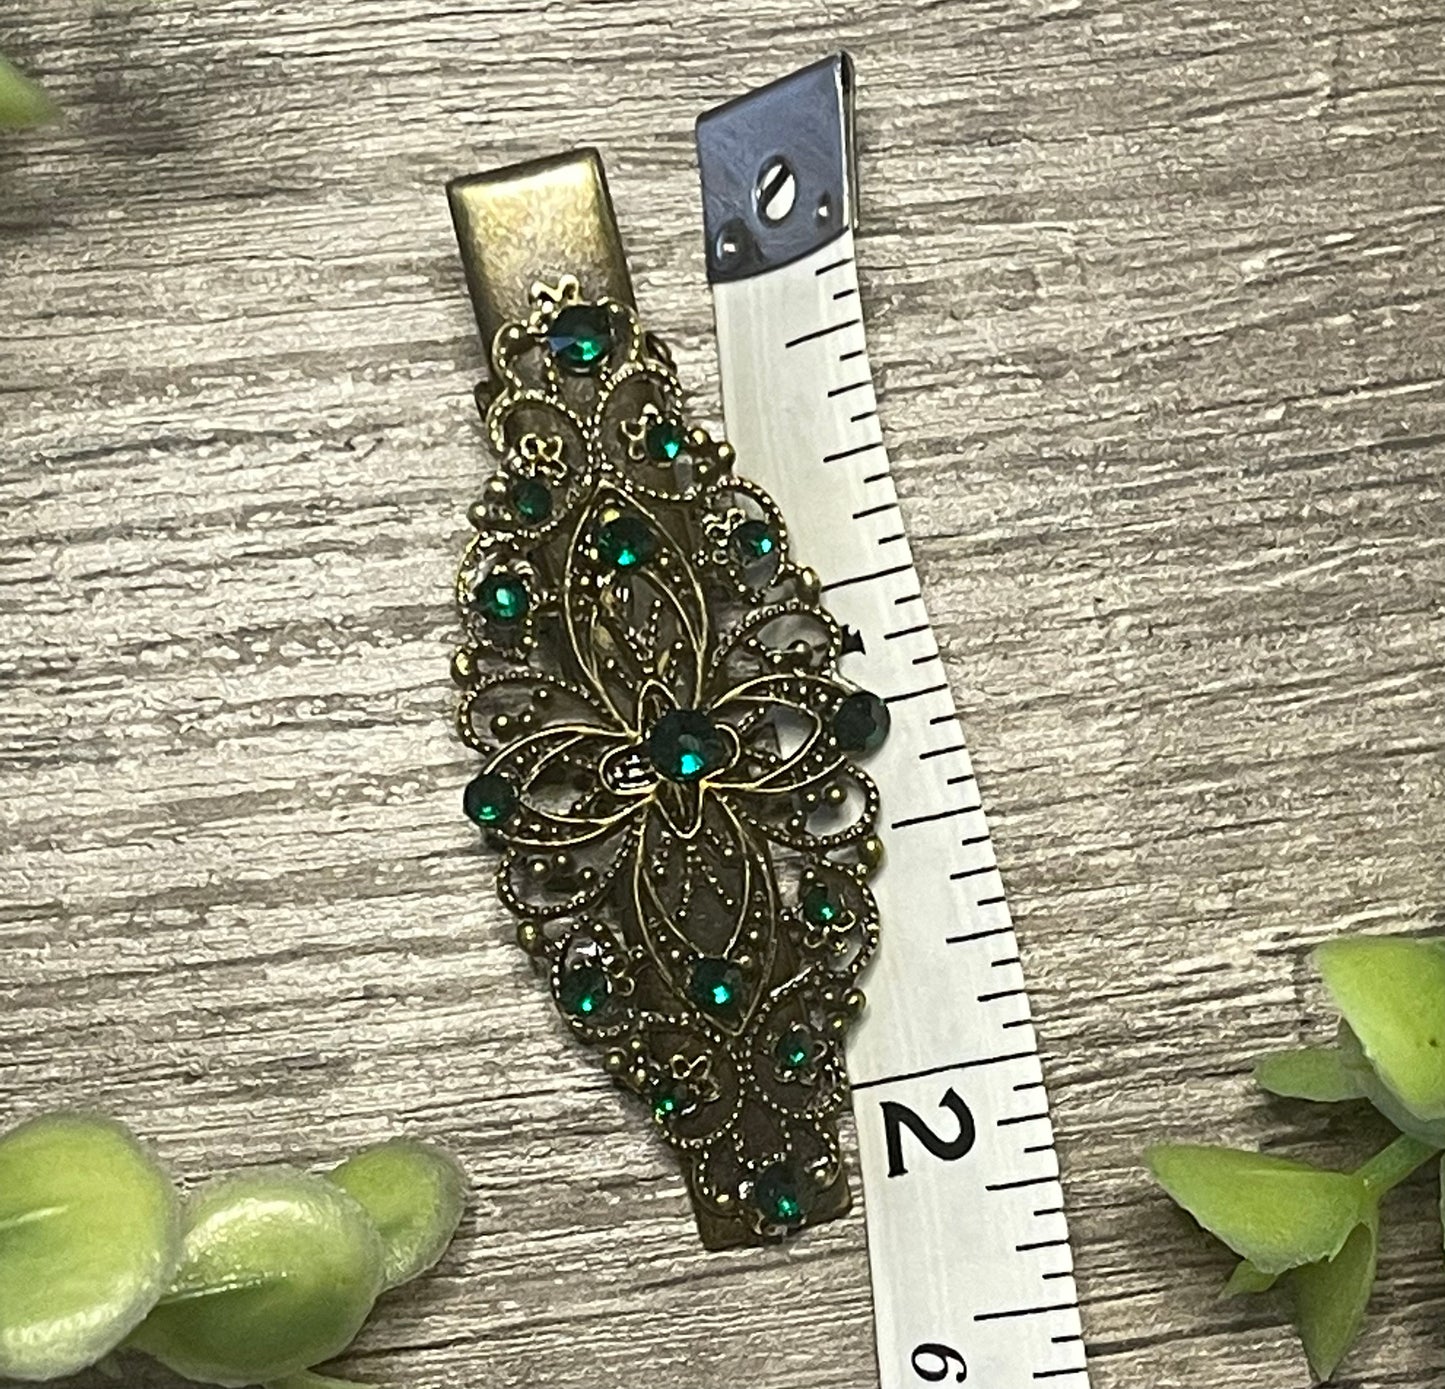 Emerald green antique style hair alligator clip approximately 2,5” long Handmade hair accessory bridal wedding